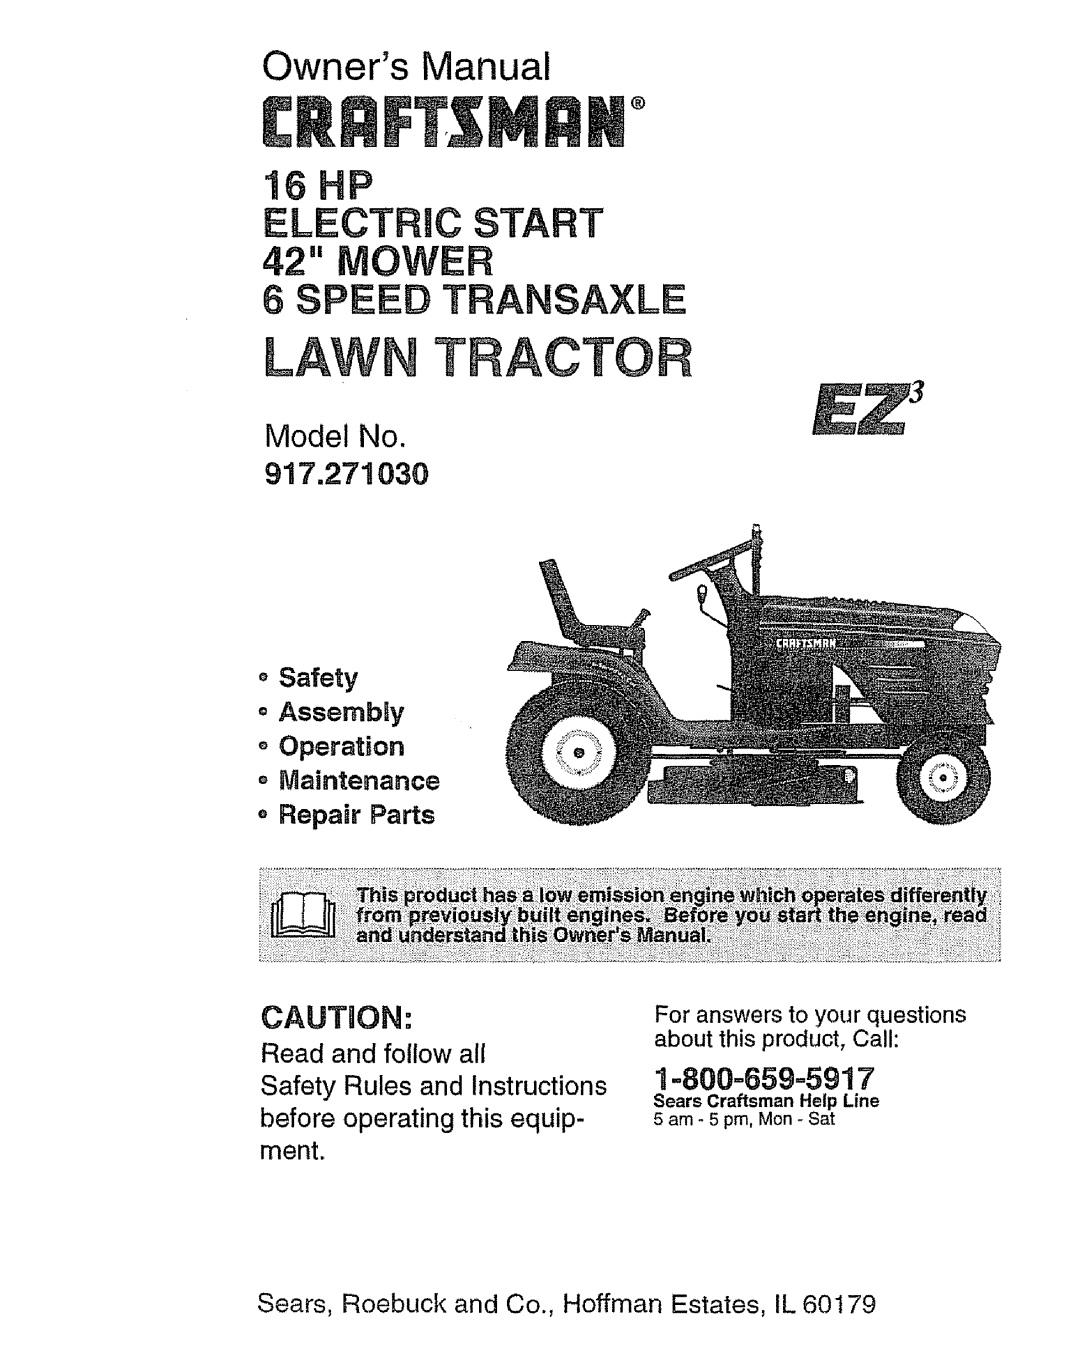 Craftsman 917.27103 owner manual Model No 917.27!030, Safety, Lawn, Owners Manual, I HP ELECTRIC START 42 MOWER 